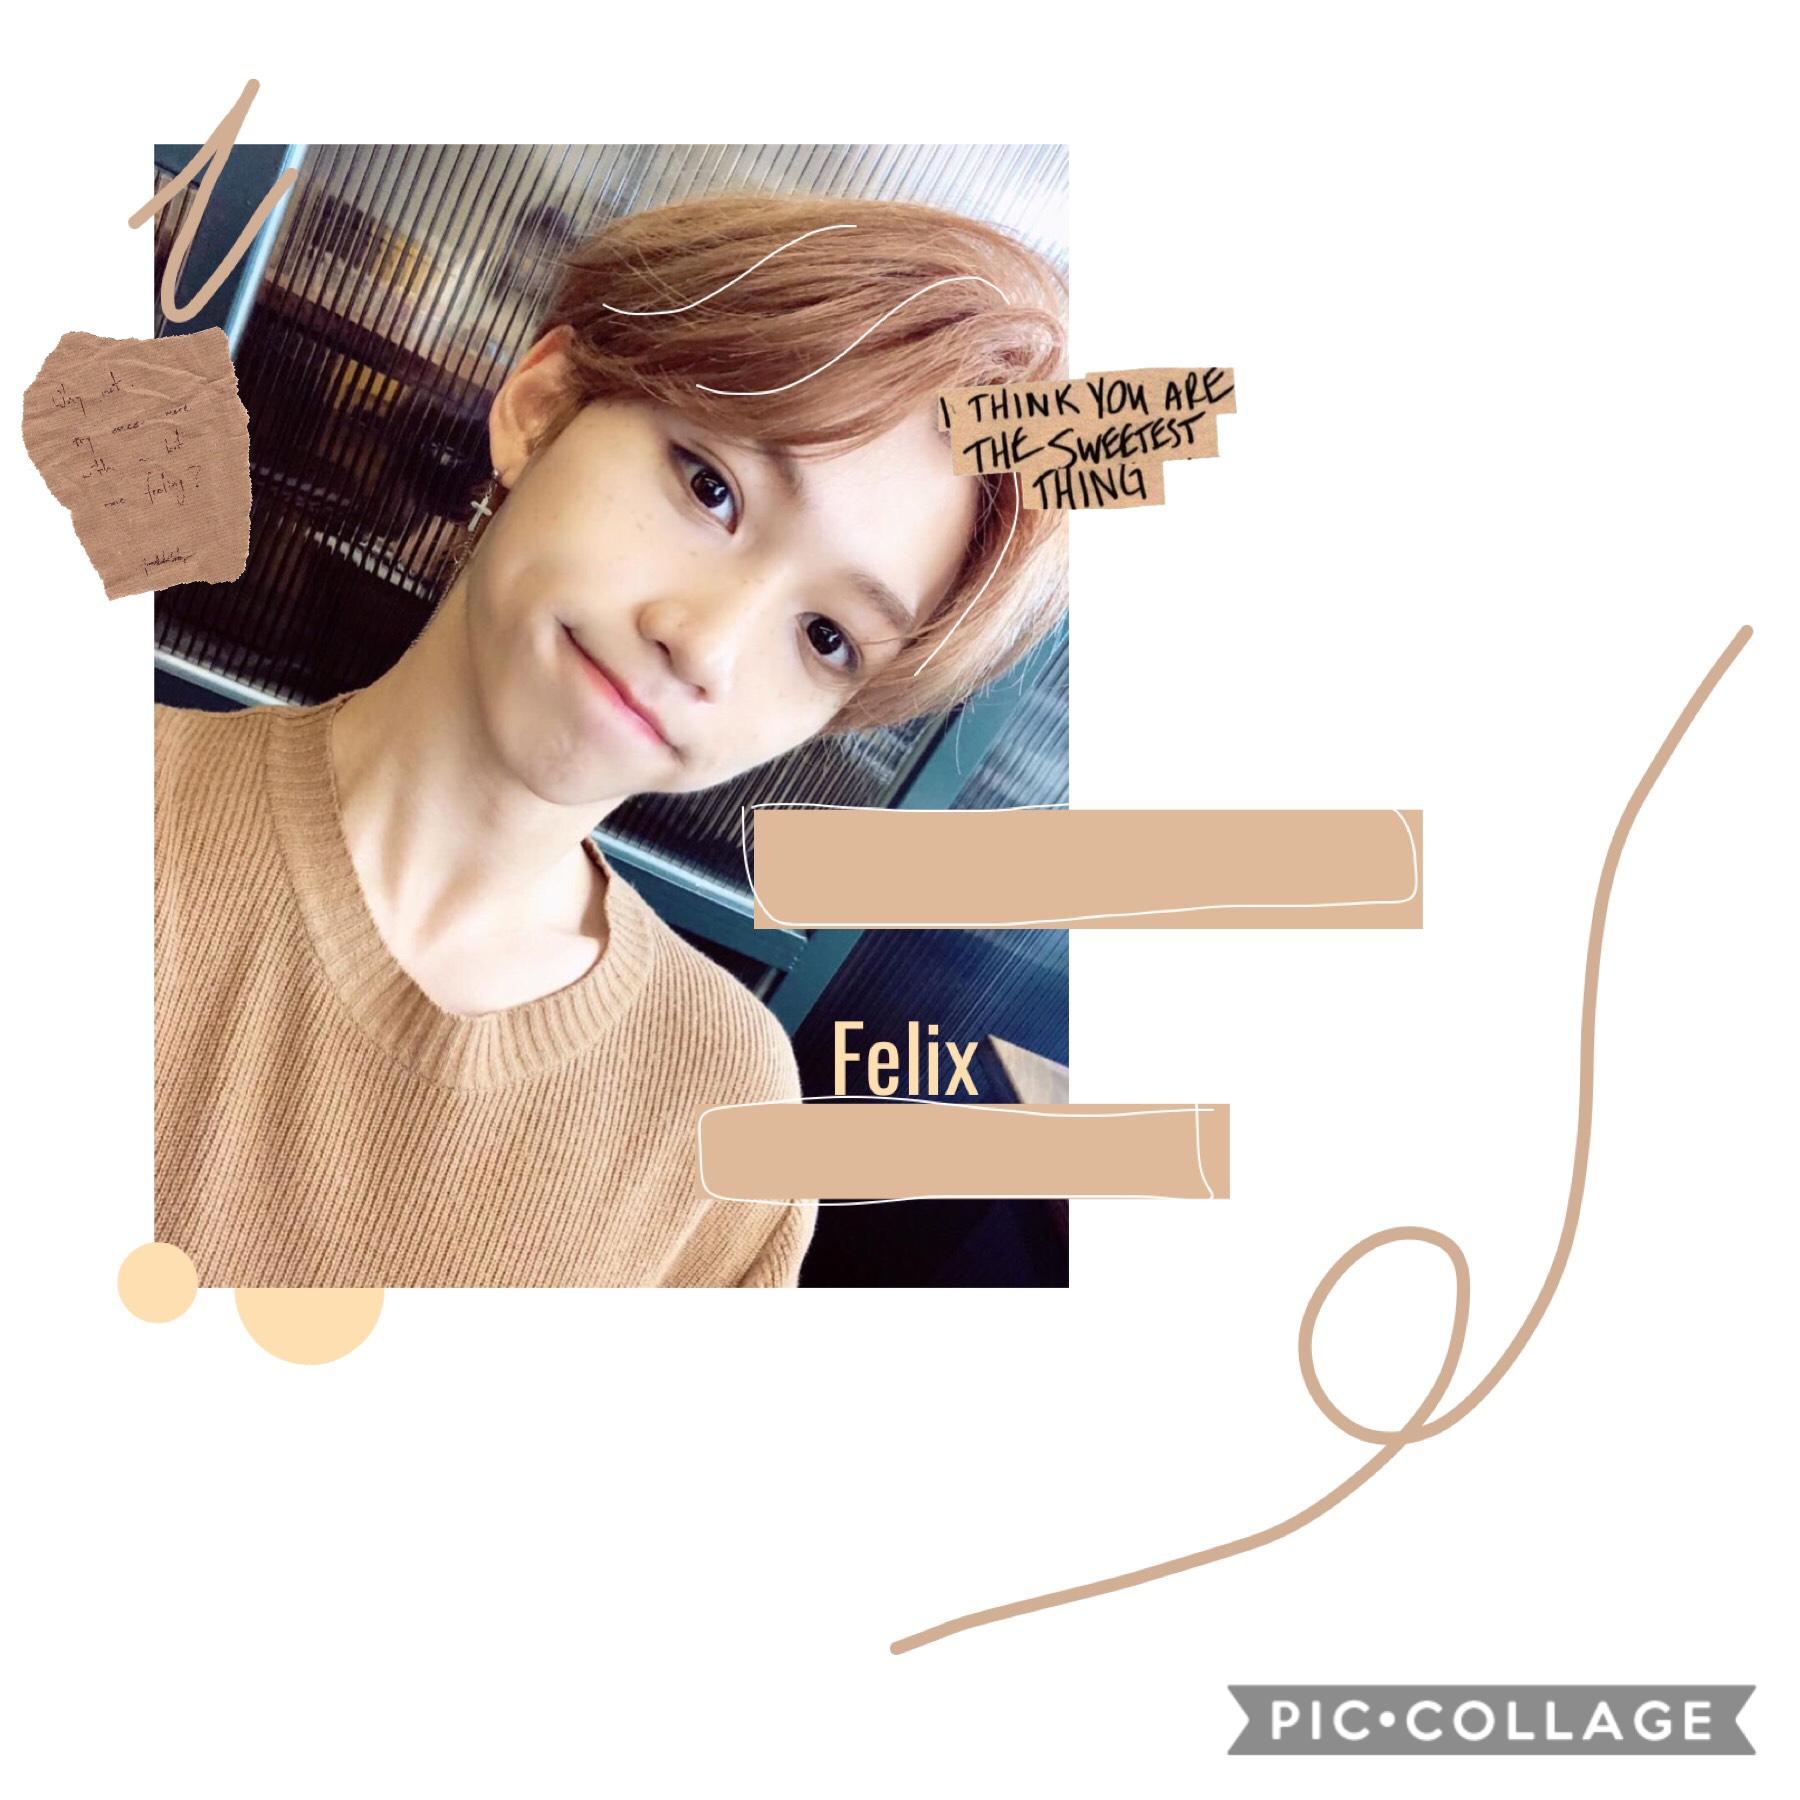 Felix edit because I have been worrying way to much about Stray Kids’ mental health, especially Felix’s- Take care of yourself Felix💖✨